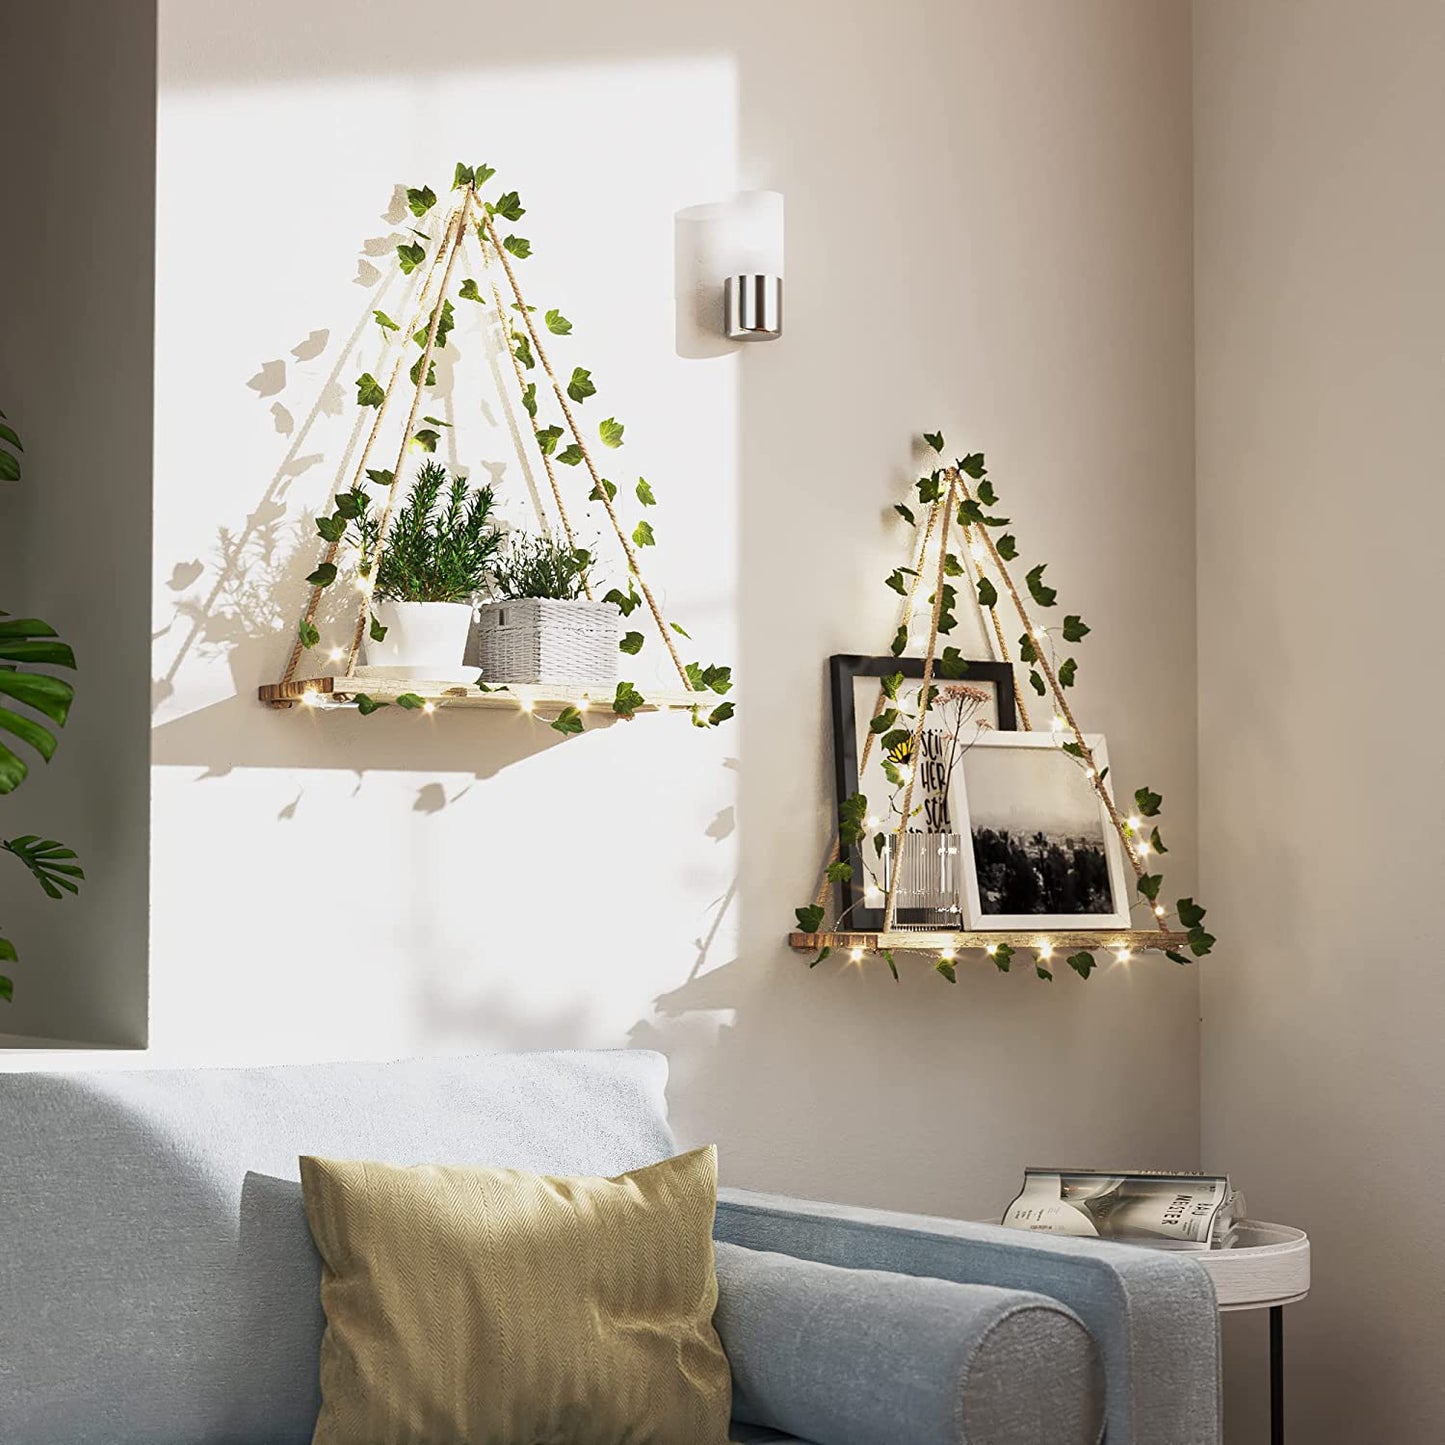 Artificial Ivy Led-Strip Wall Hanging Shelves Set of 2